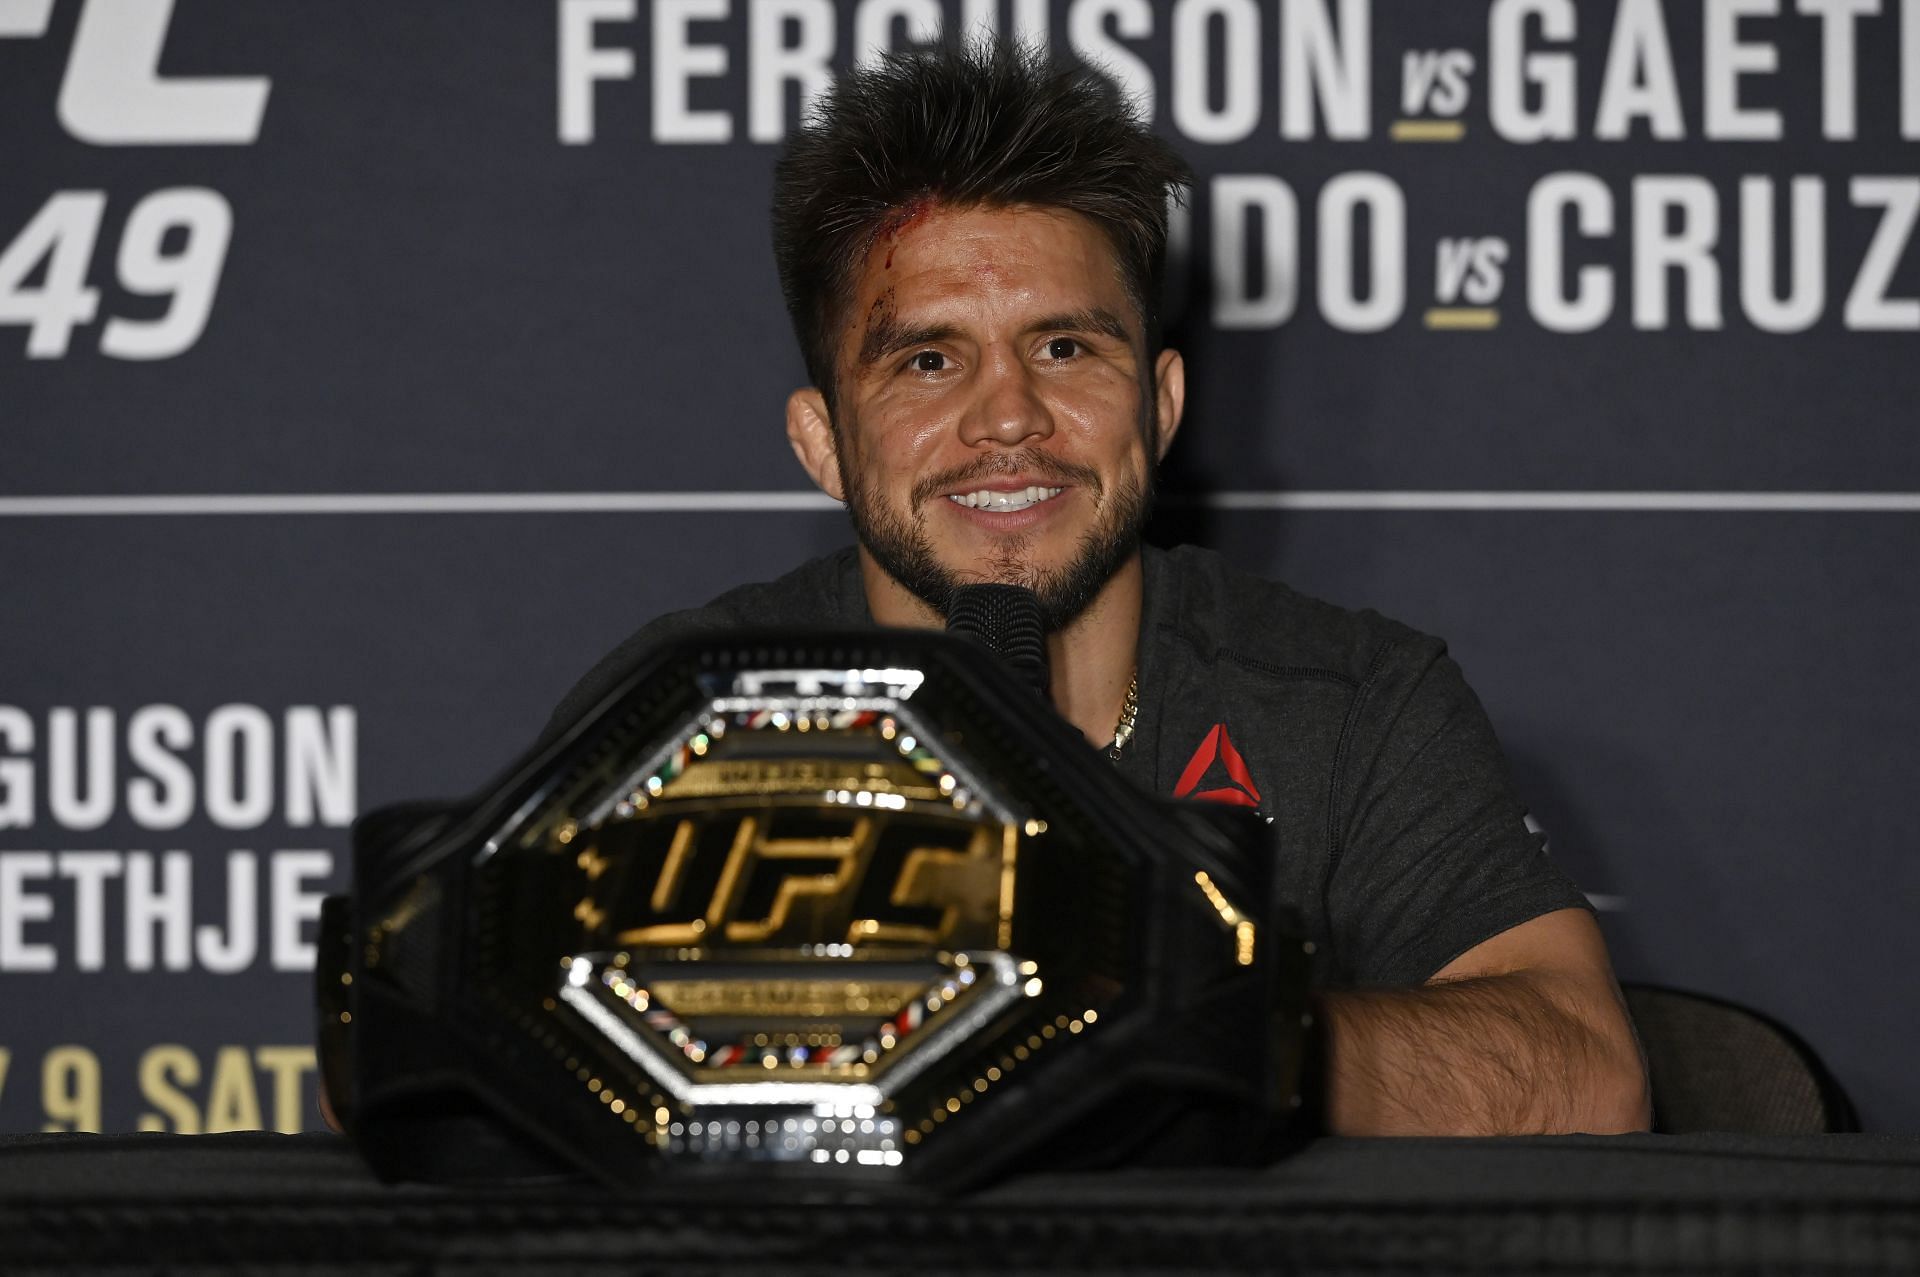 Henry Cejudo stepped away from the octagon before he could really achieve his full potential